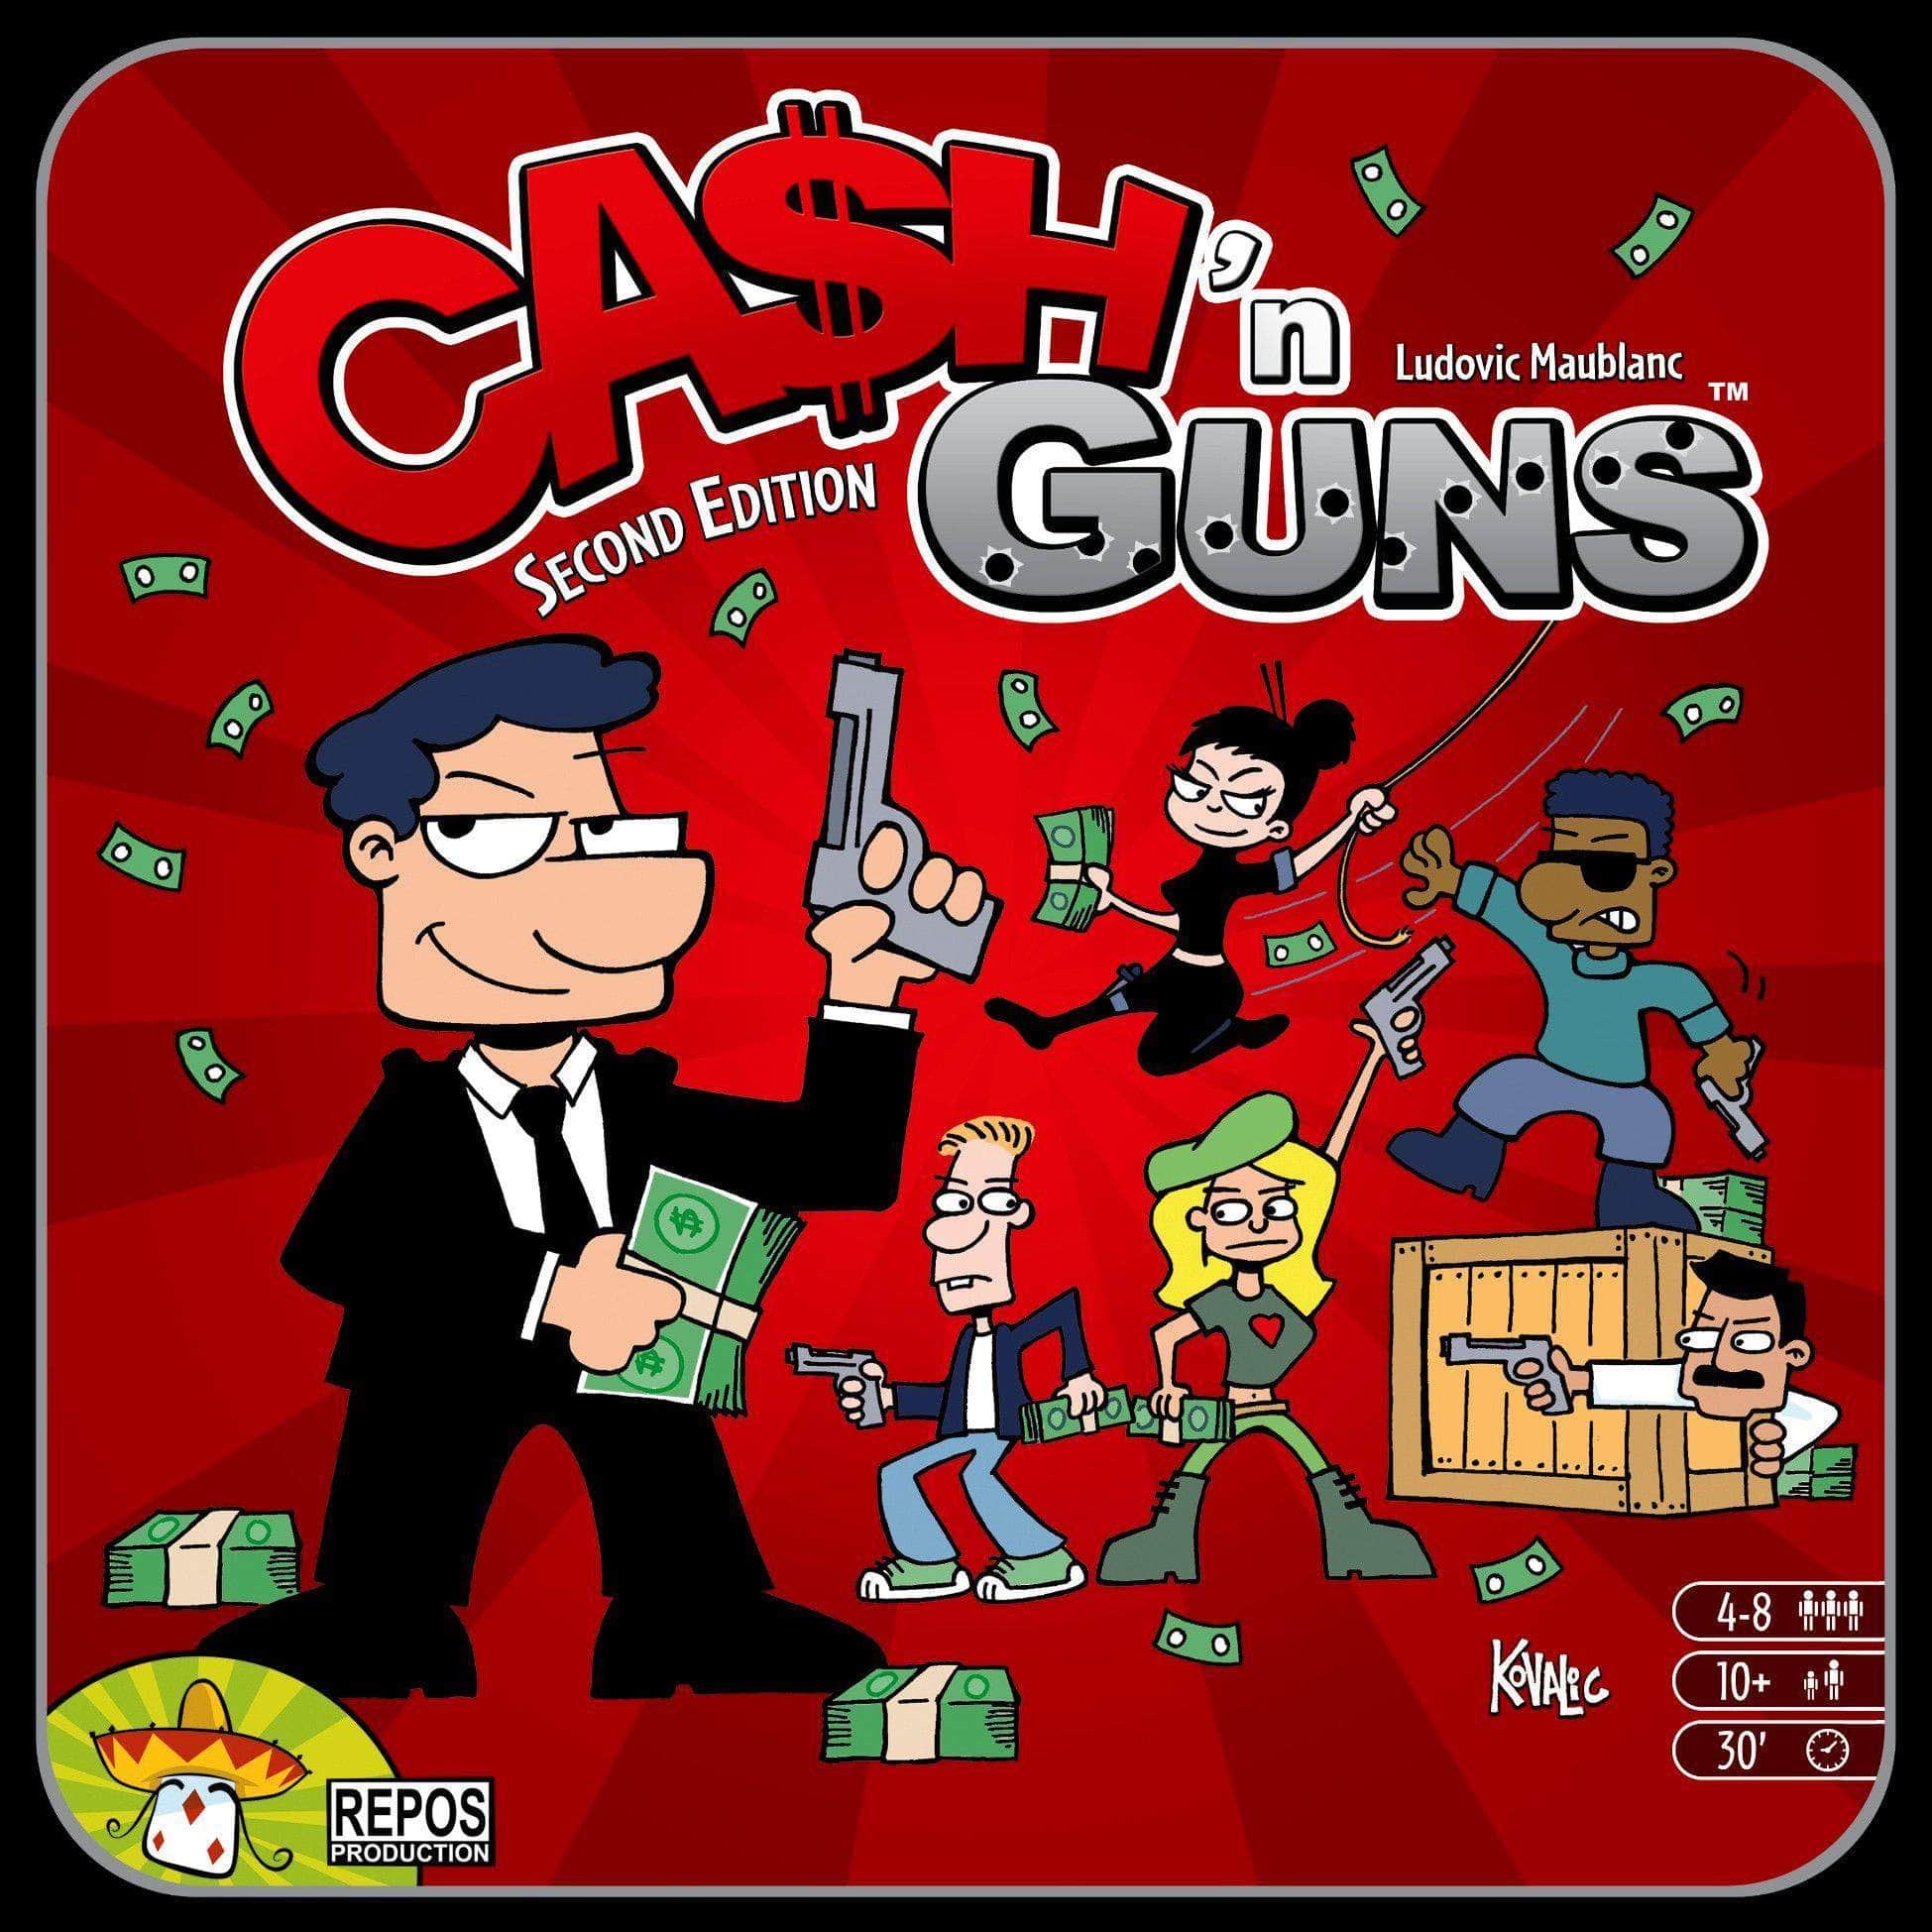 CA $ H 'N GUNS (Anden udgave) (Retail Edition) Retail Board Game Asterion Press KS800399A